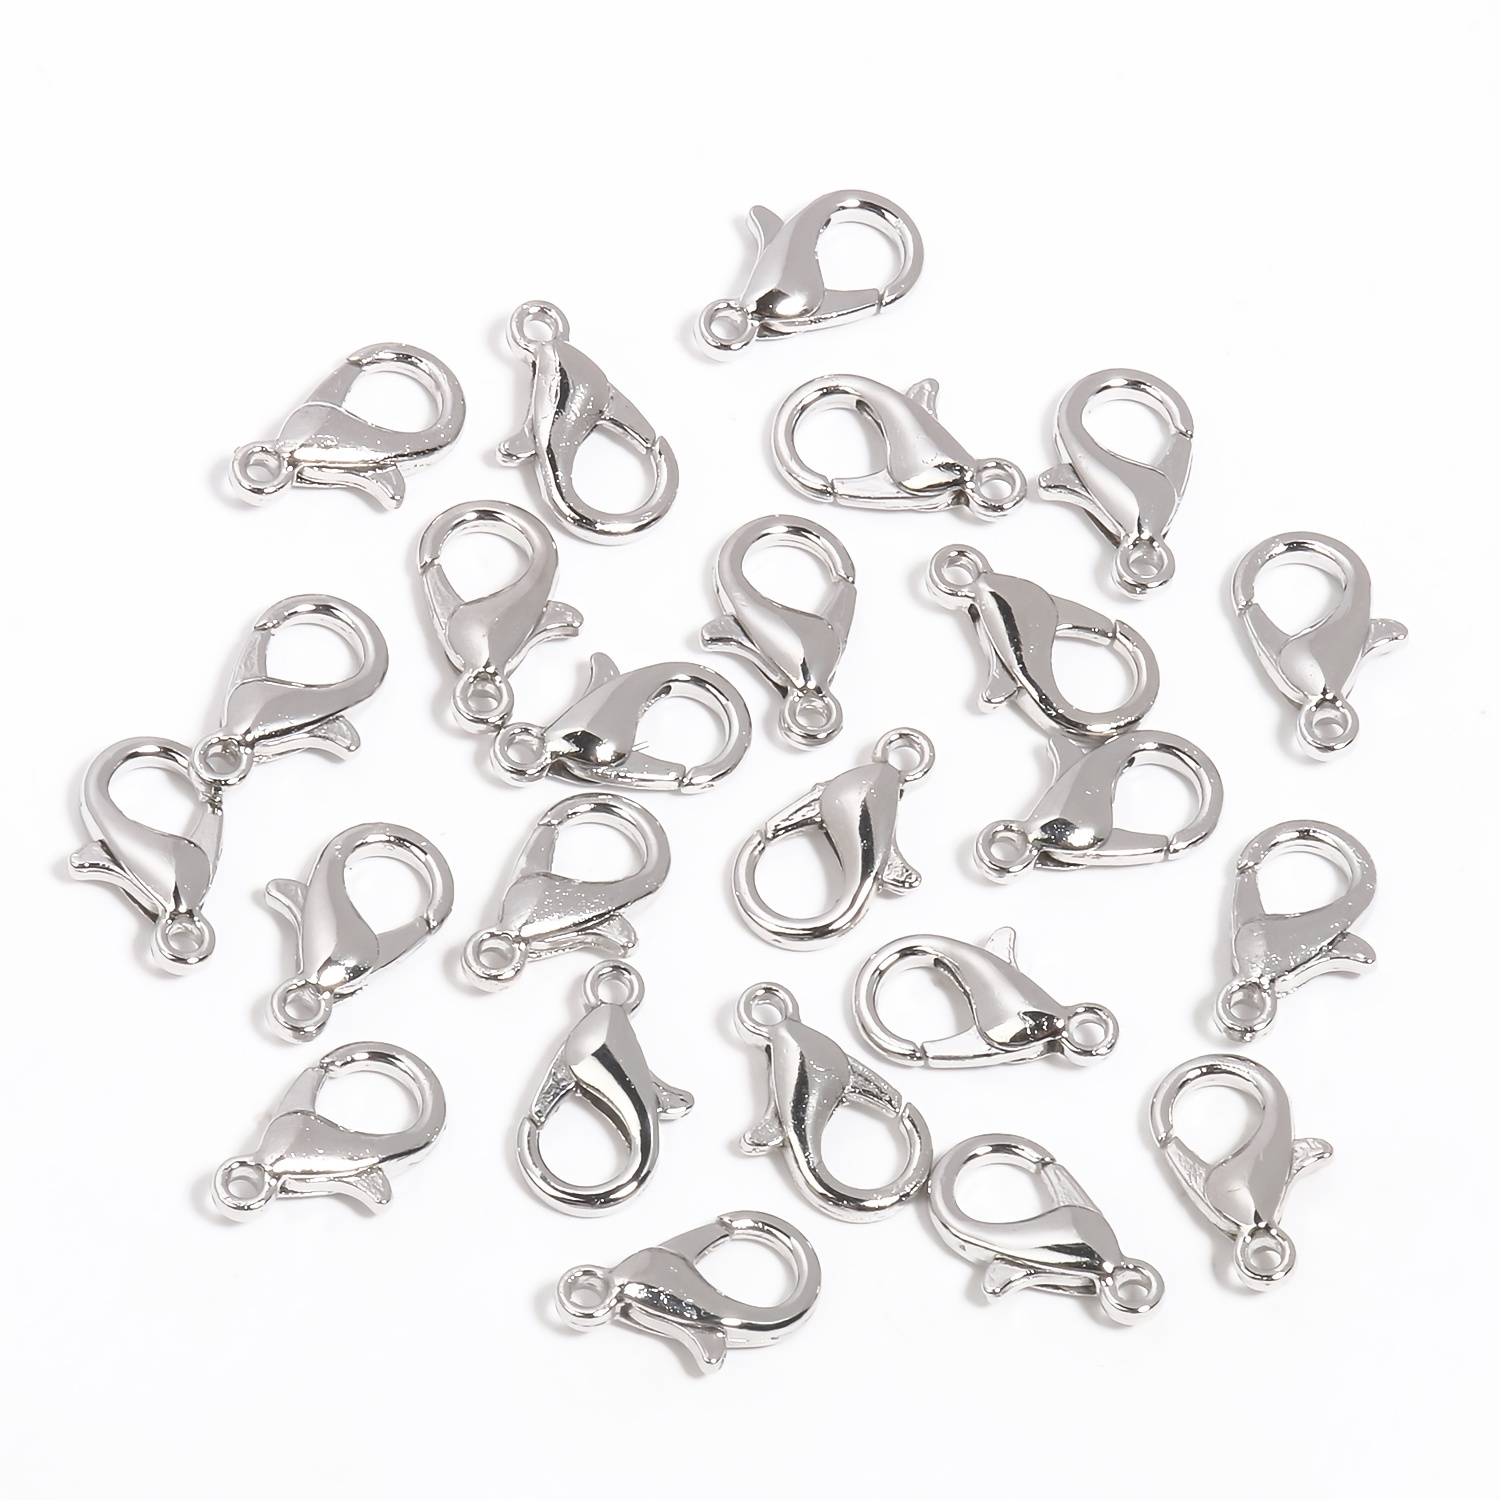 10pcs Silver Plated Lobster Clasps For Bracelets Necklaces DIY Hooks Chain  Closure Accessories For Jewelry Making